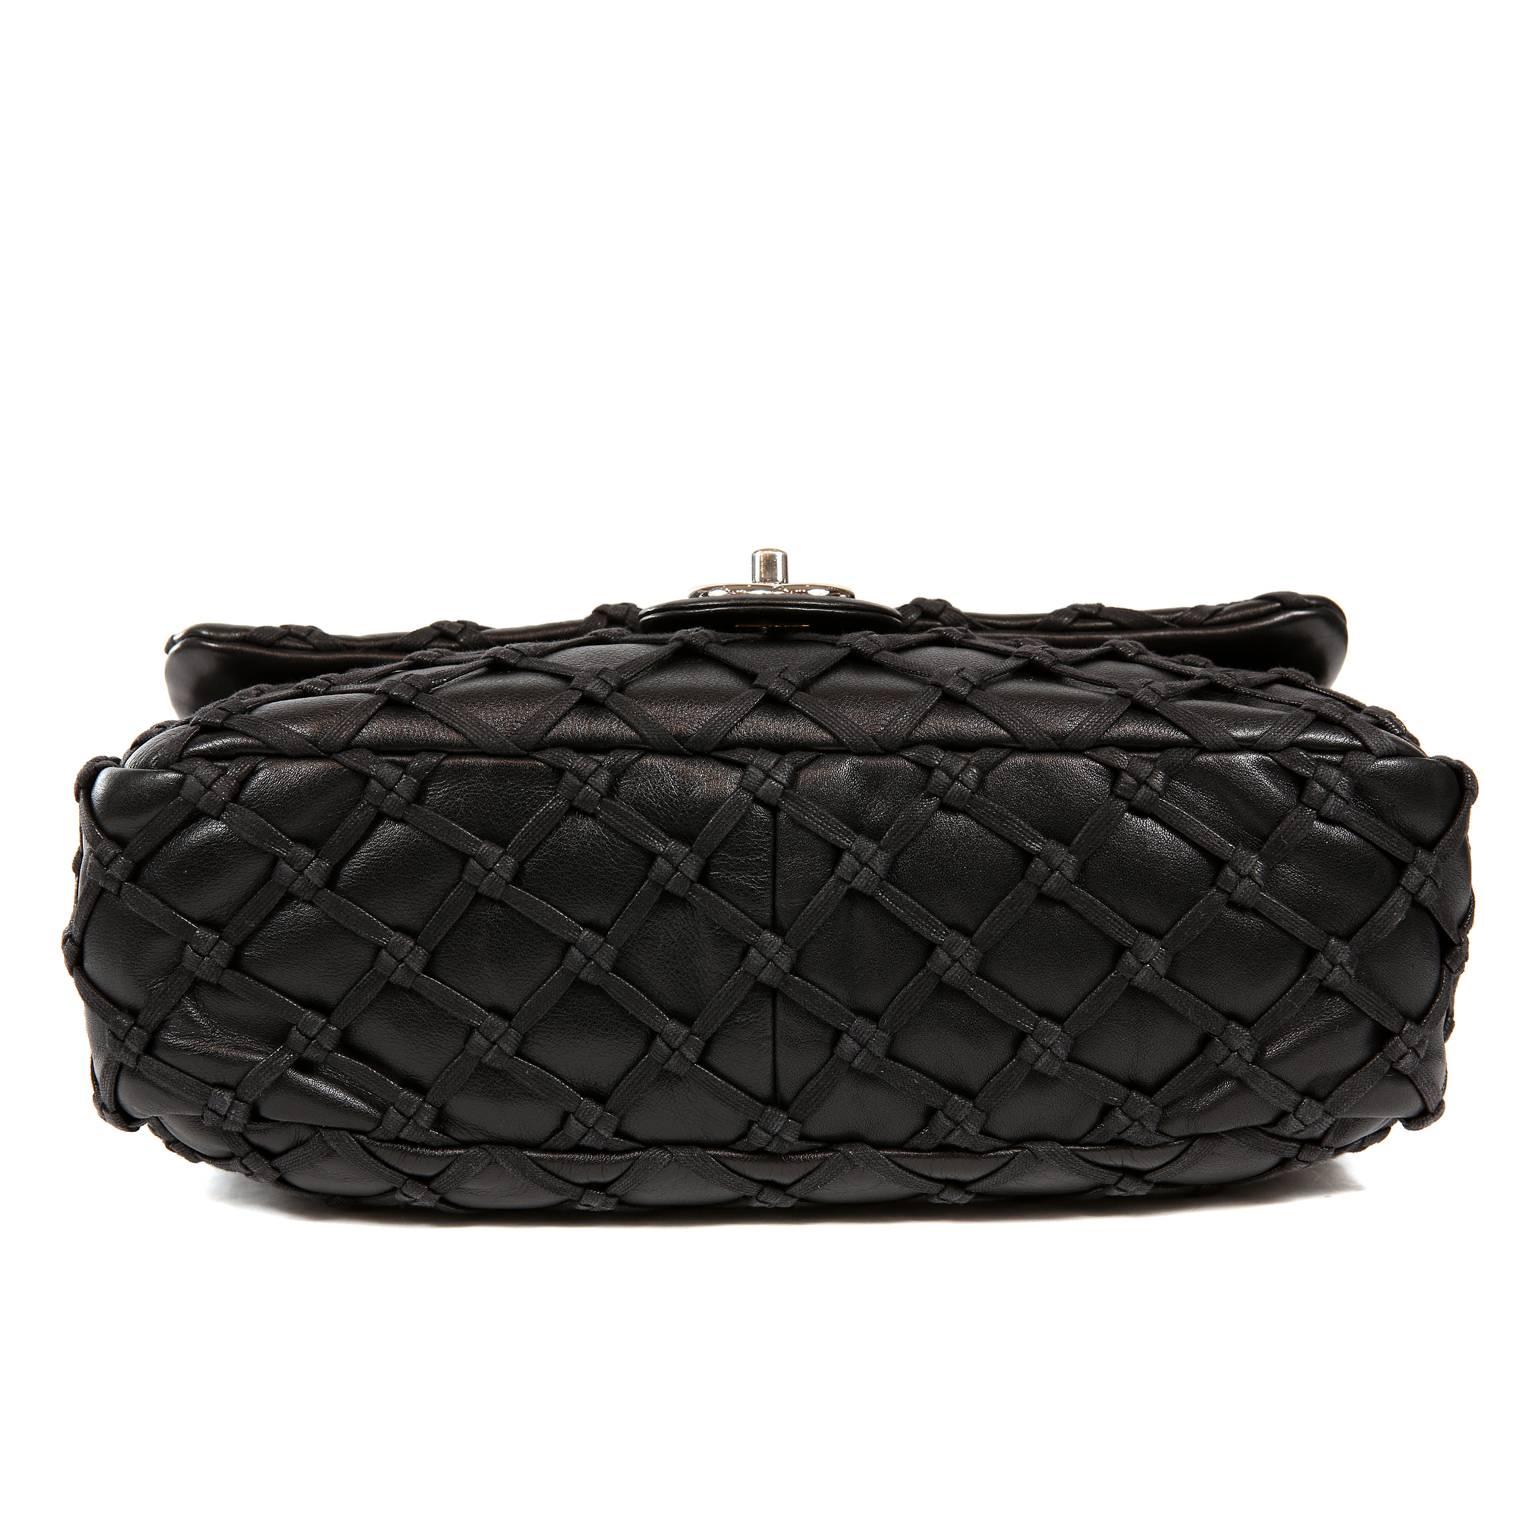 Women's Chanel Black Leather Woven Top Stitch Classic Flap Bag